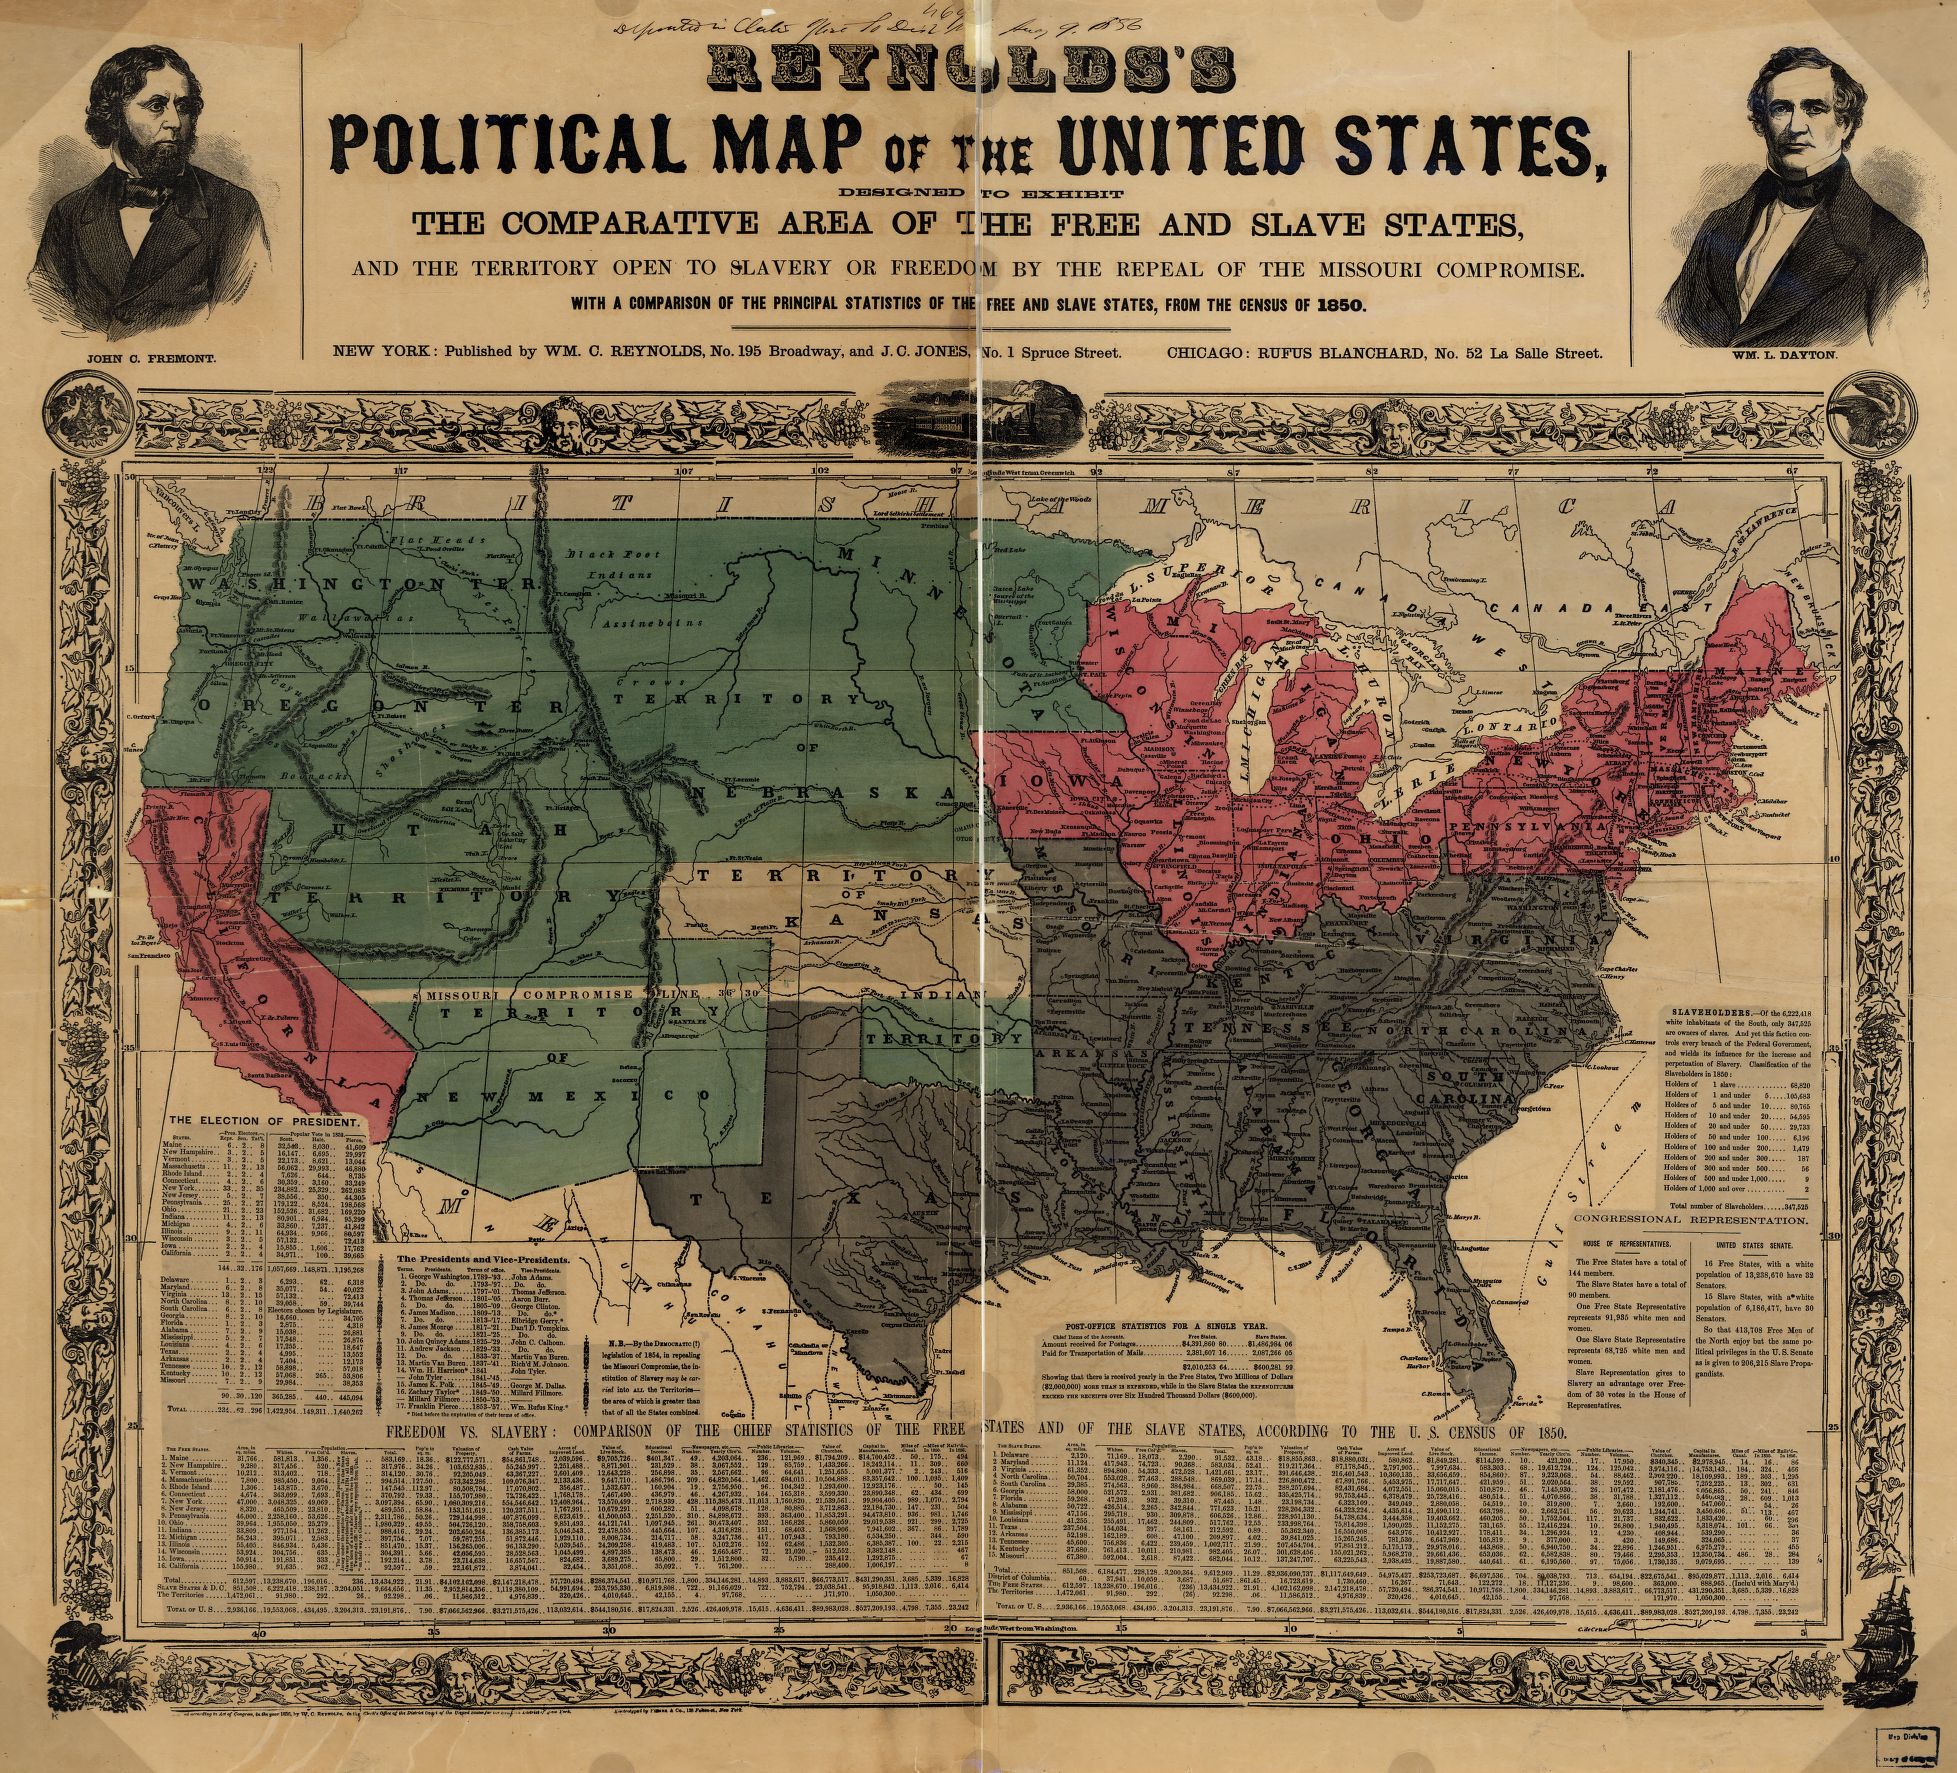 Courtesy of Library of Congress Map Division